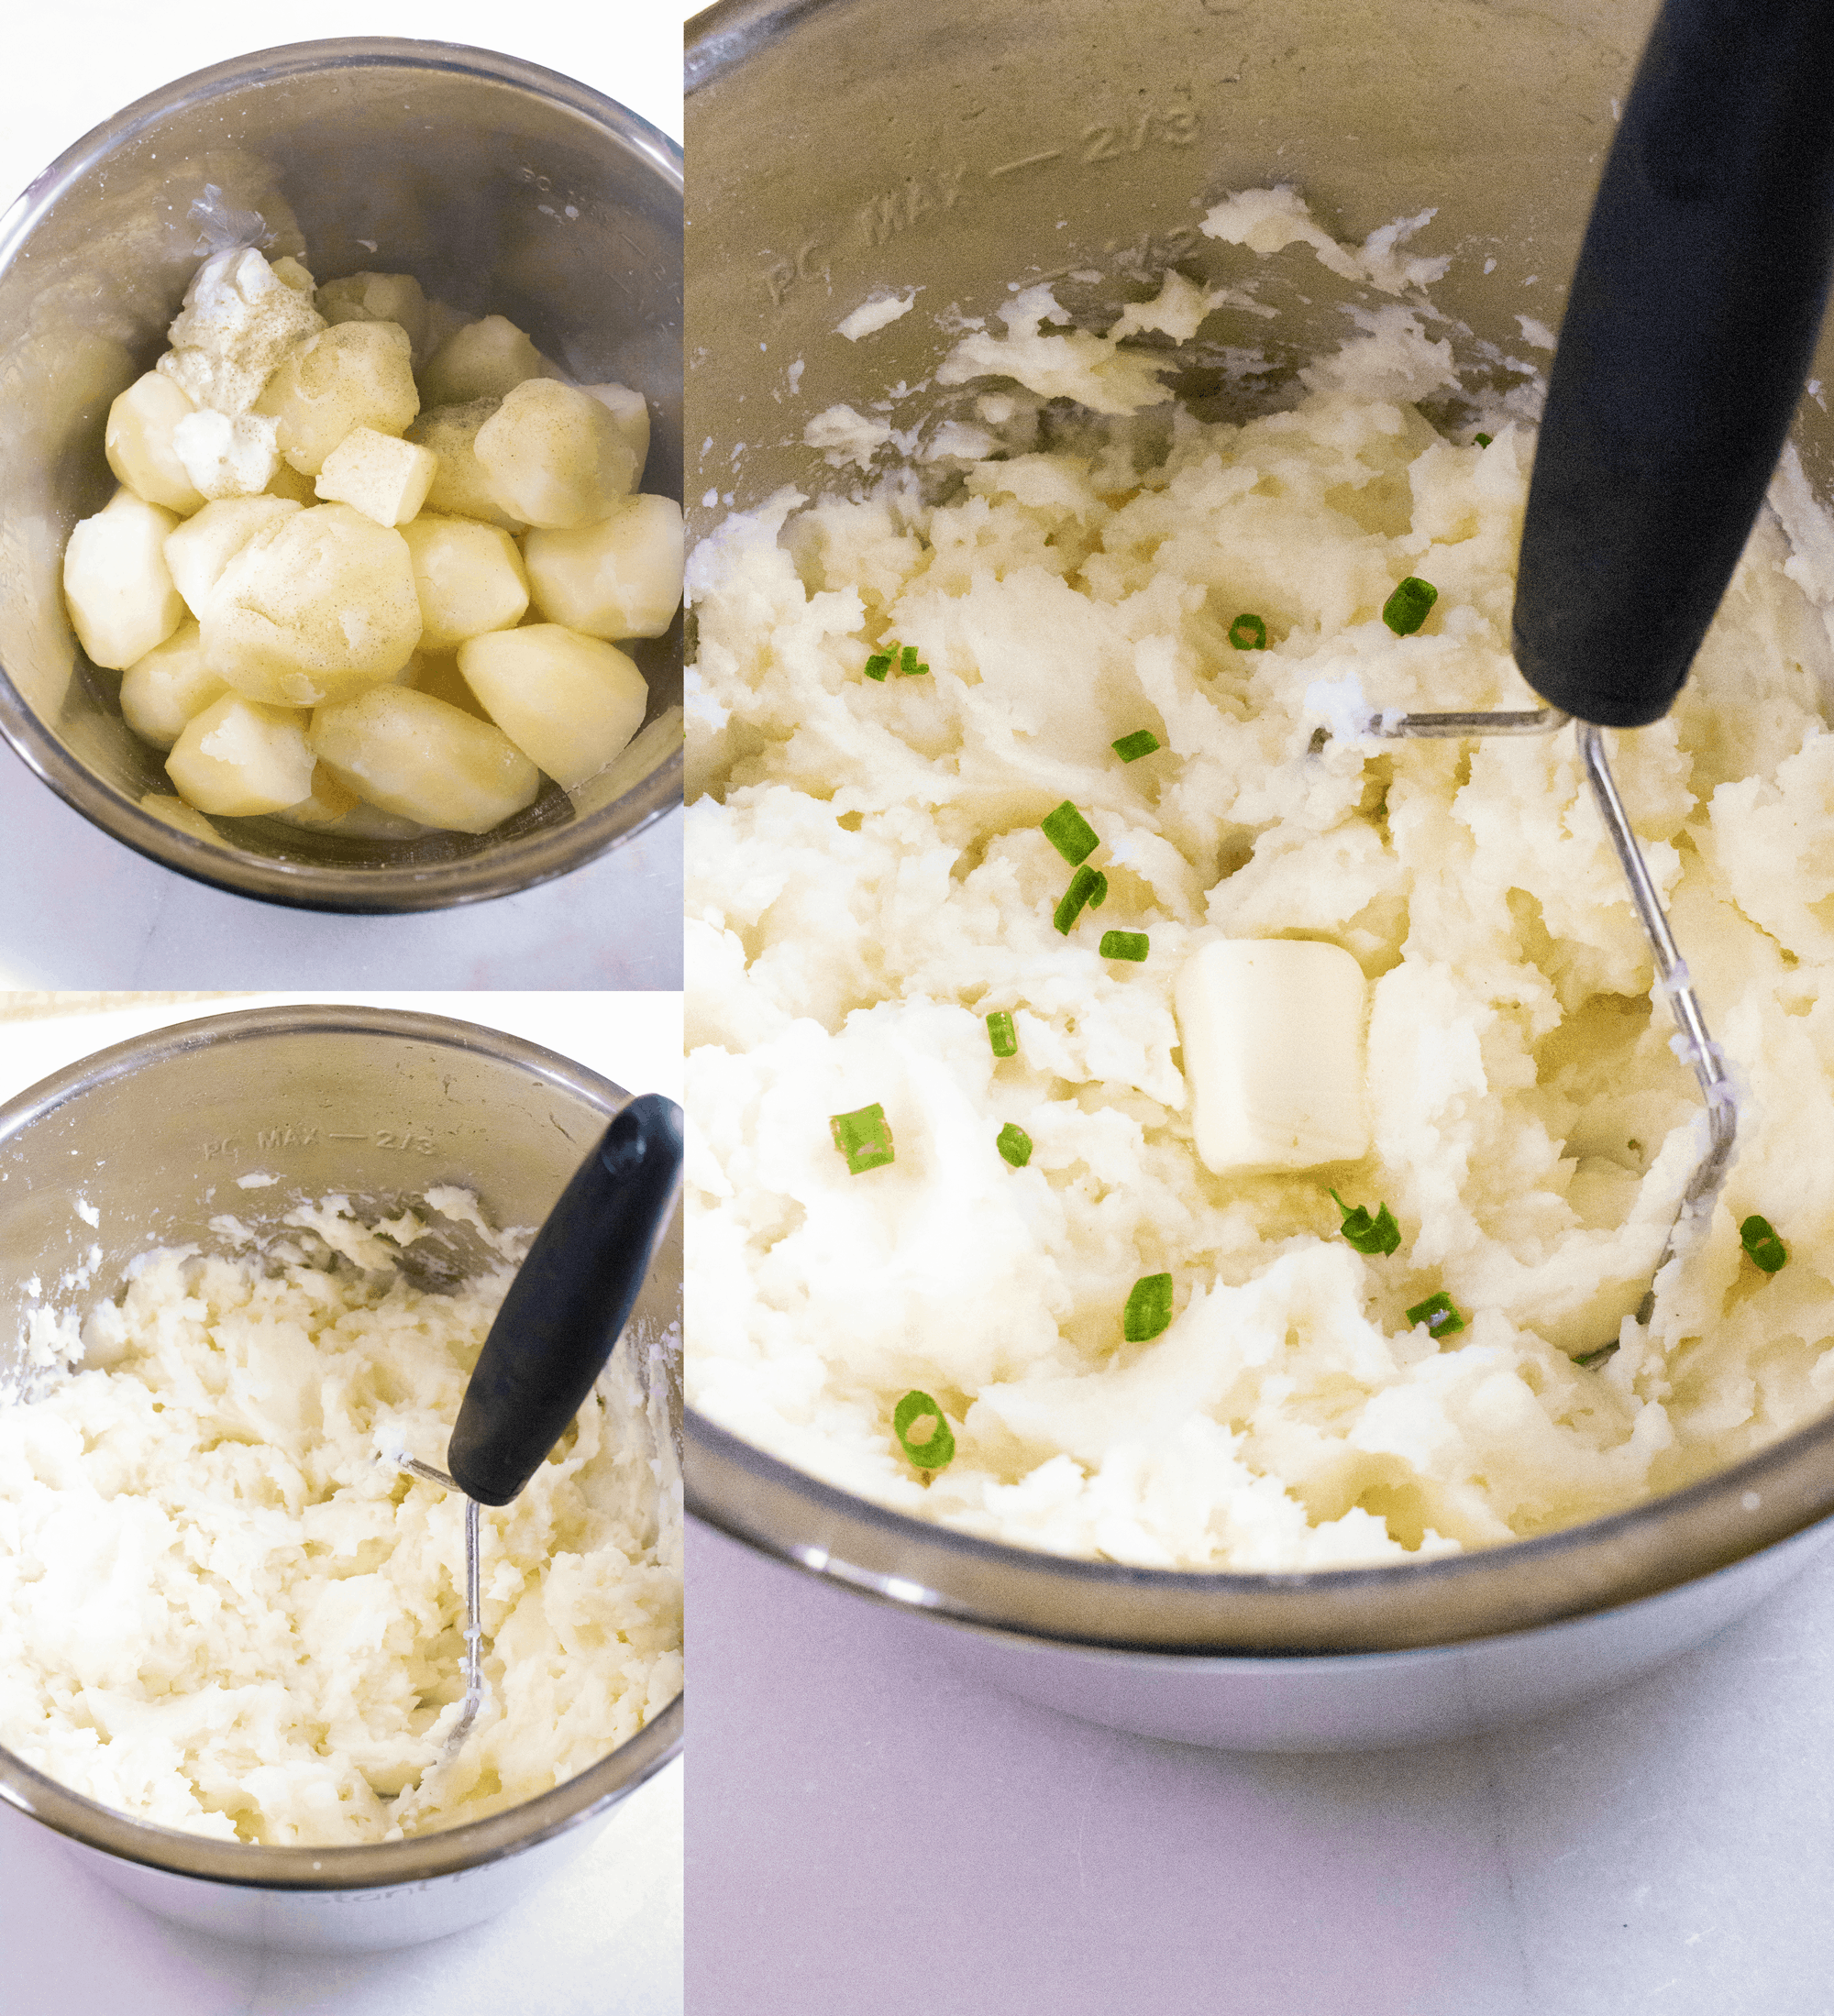 in process of making and mashing potatoes